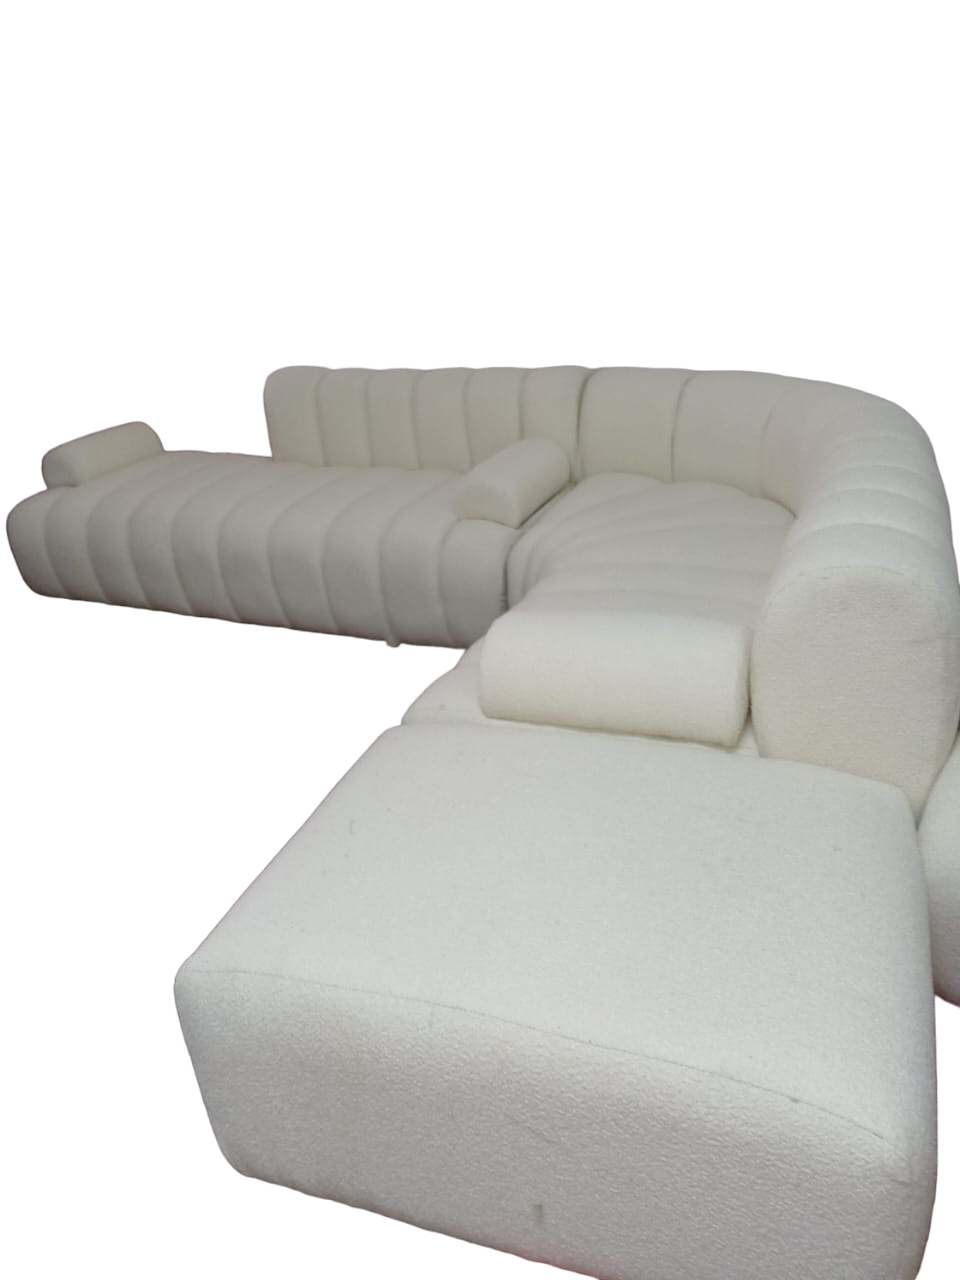 Boucle fabric corner couch with segment detail and armrests. Modular fabric couch.